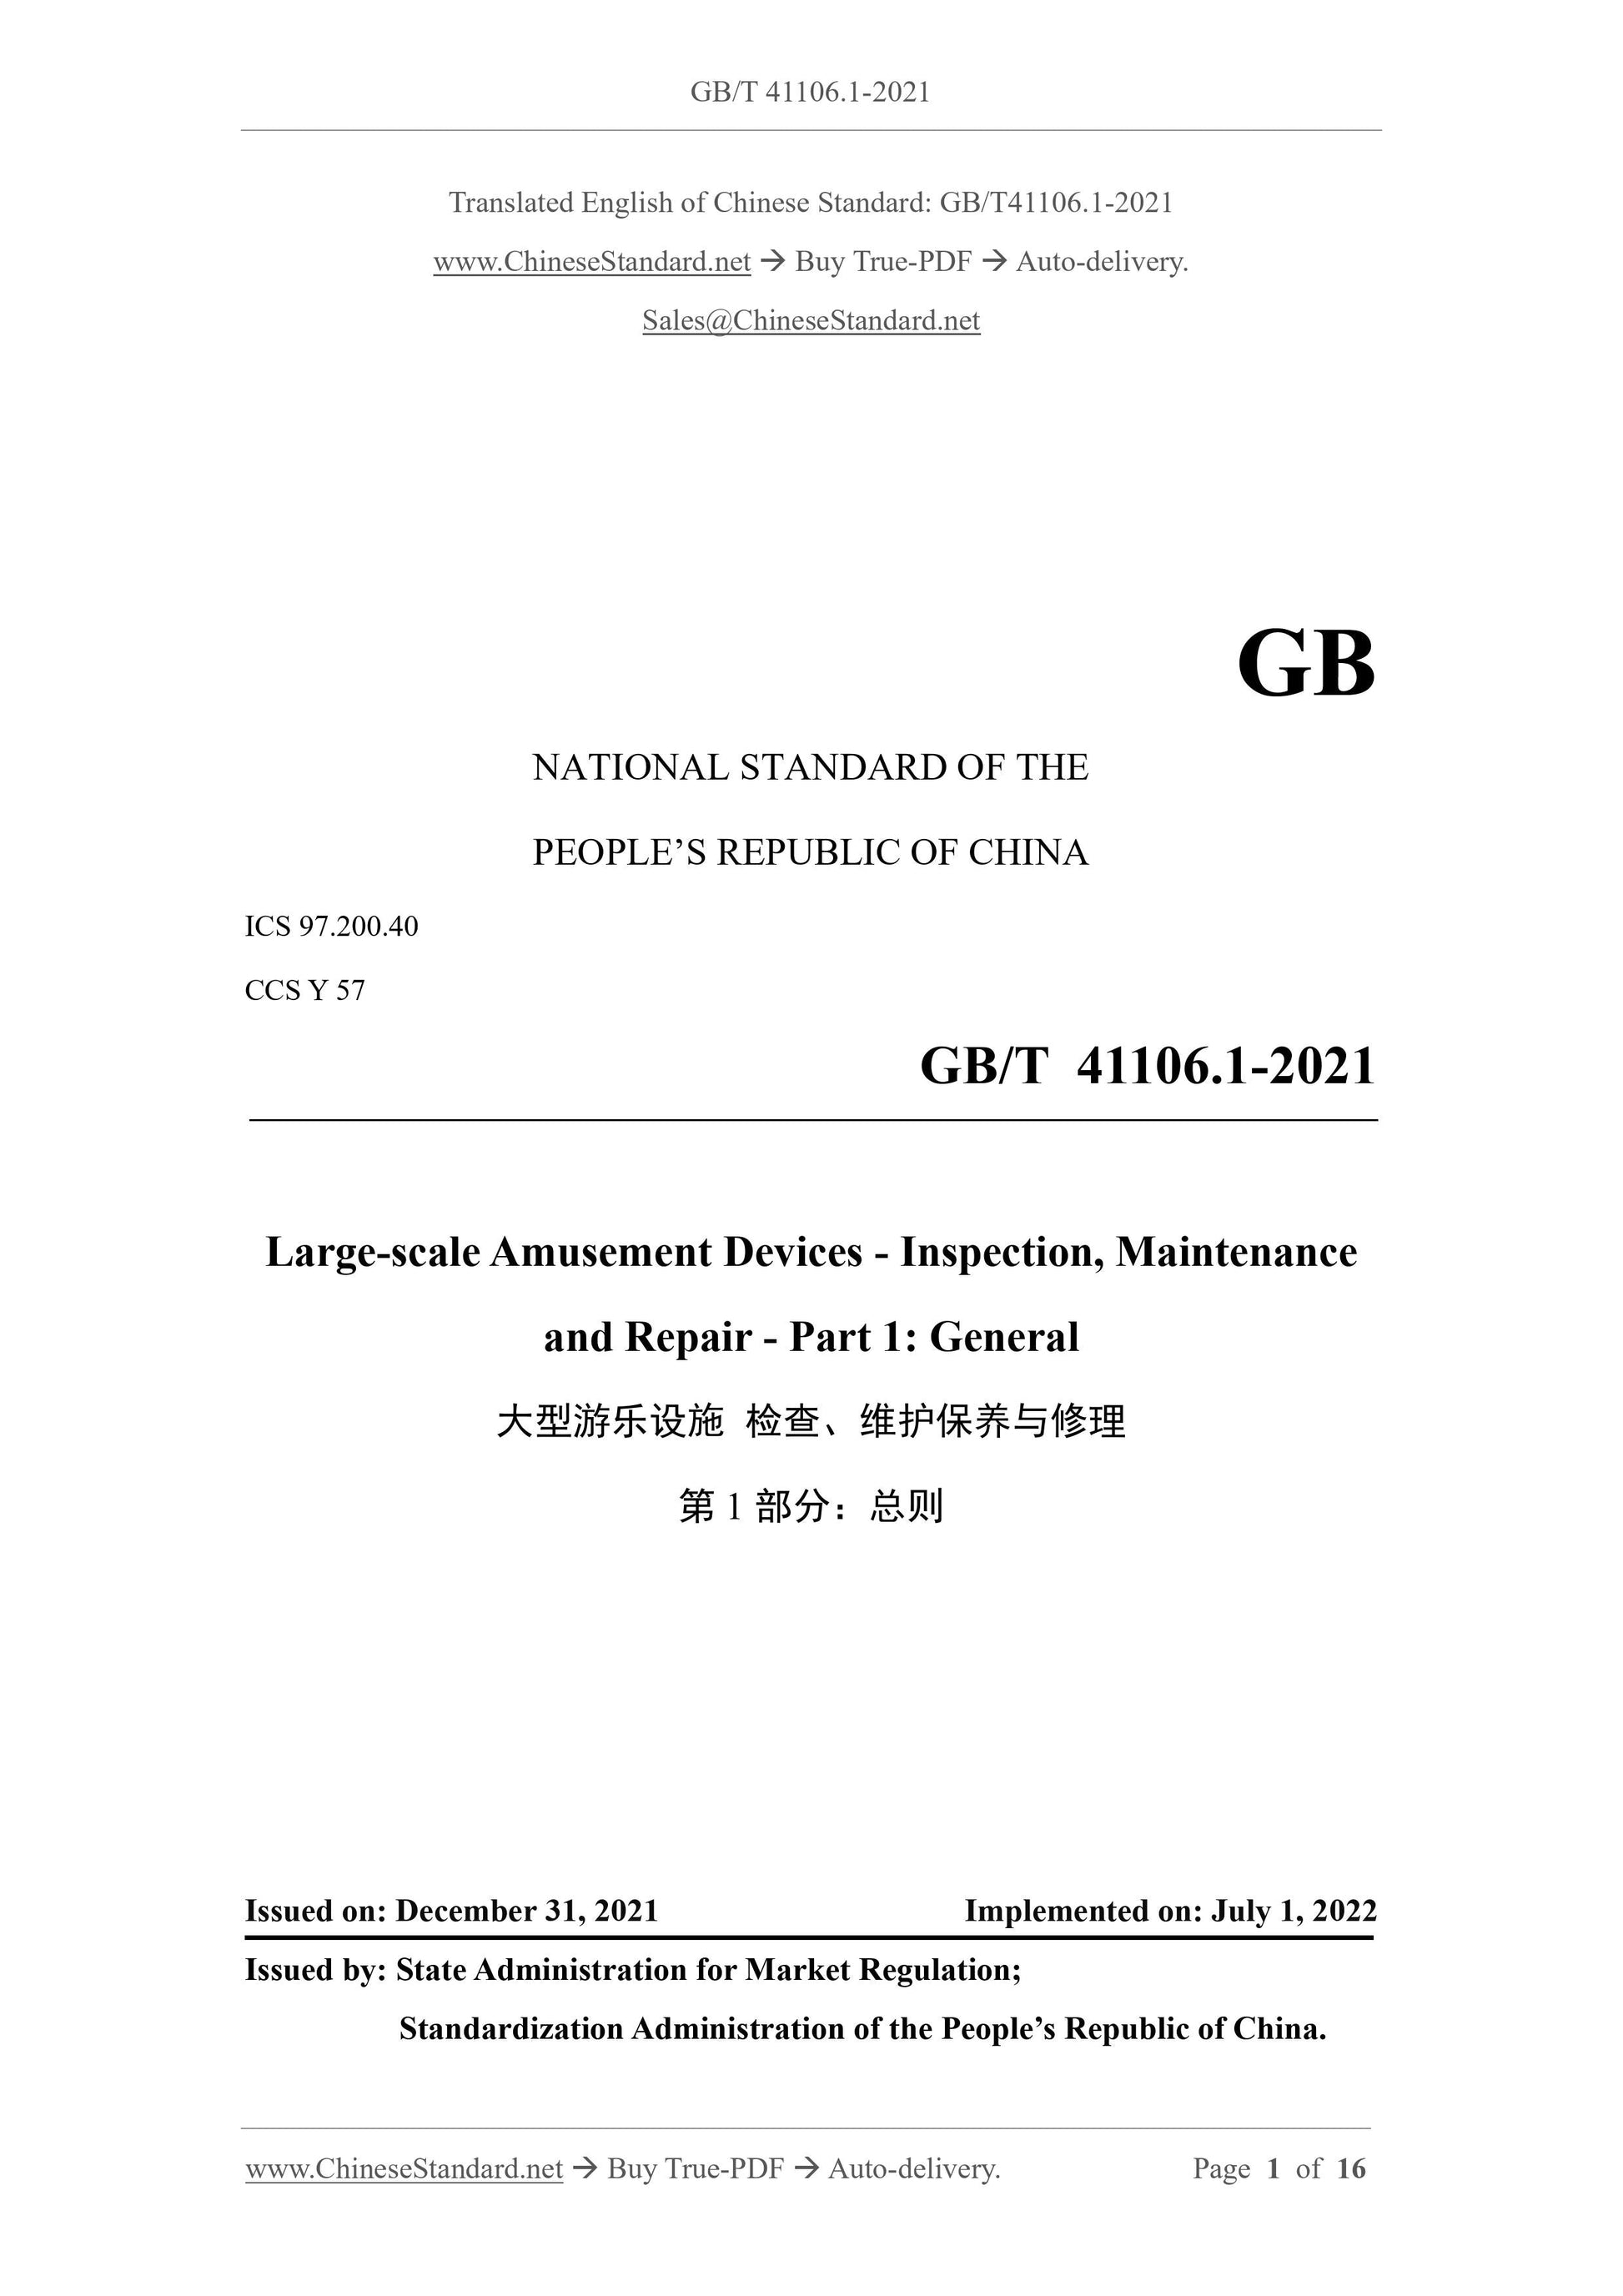 GB/T 41106.1-2021 Page 1